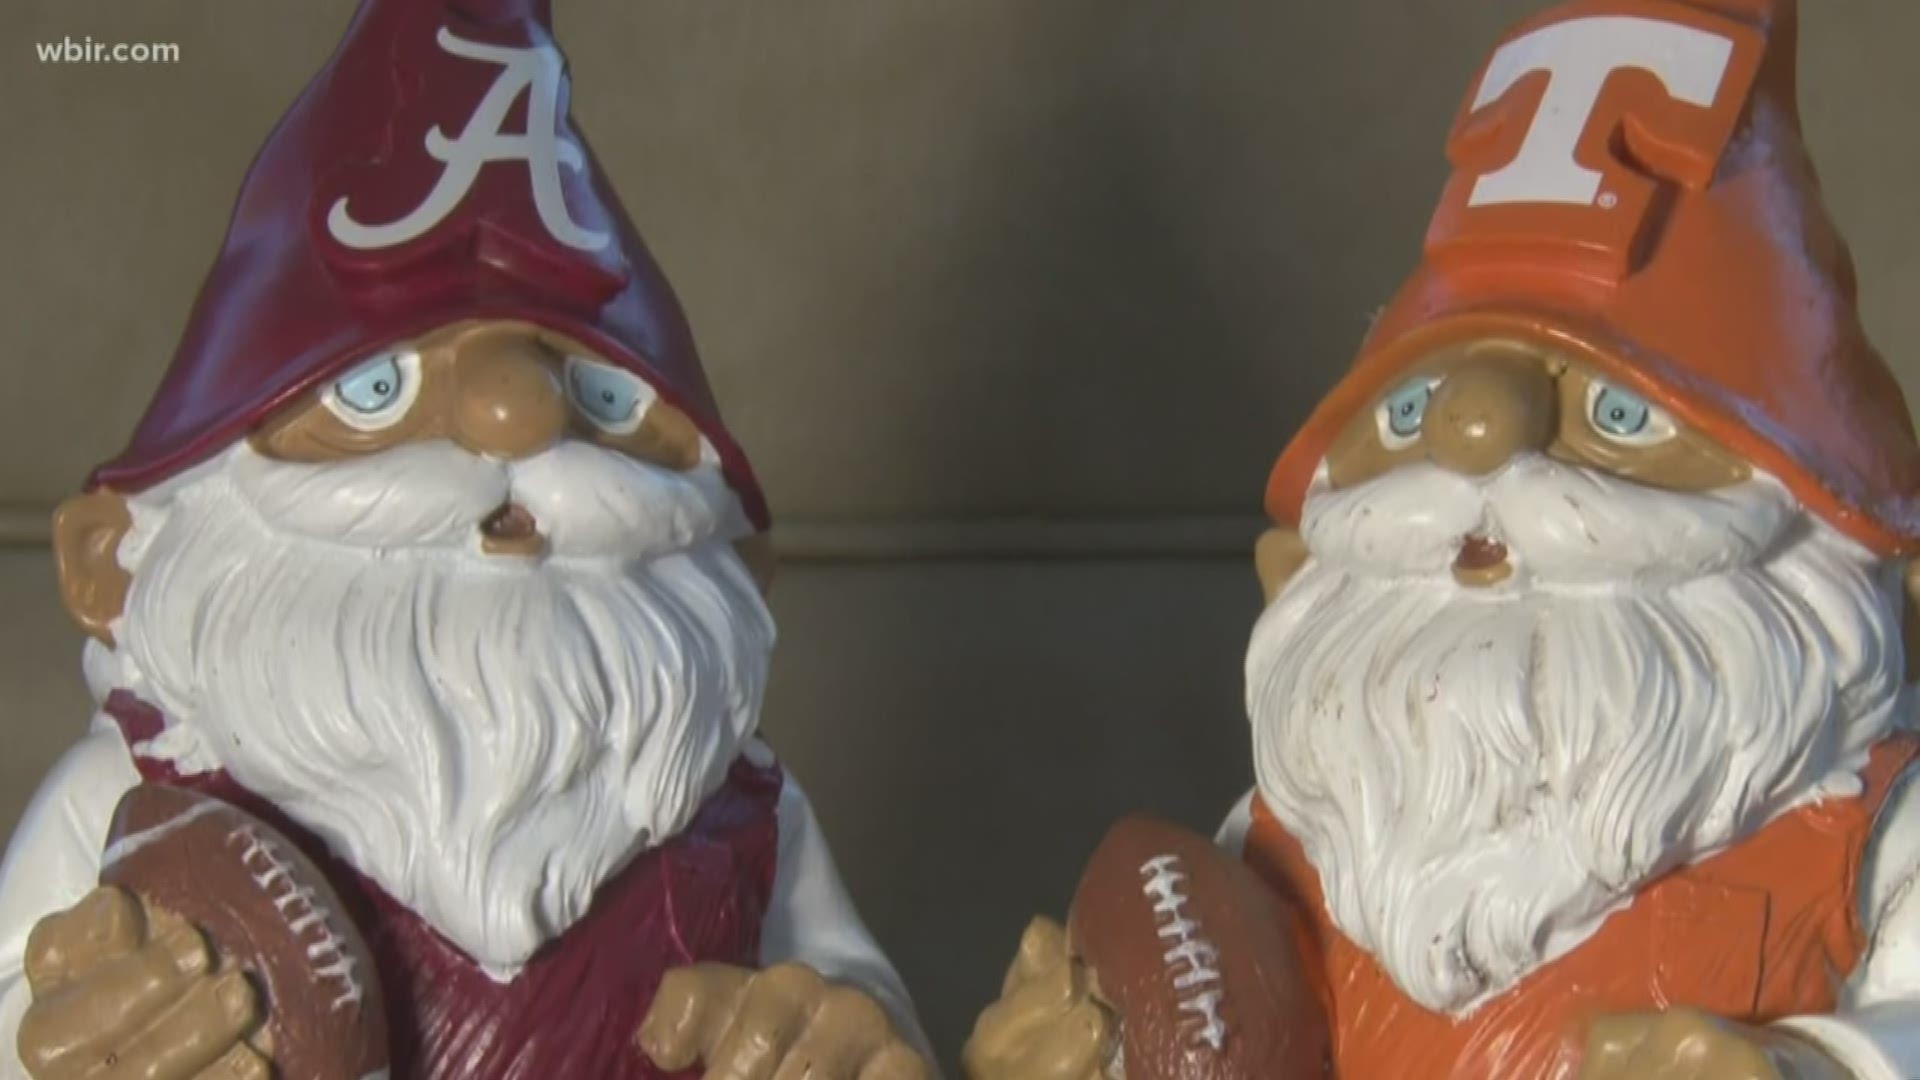 It's one thing to smack-talk Alabama fans ahead of this weekend's game. It's another to do it with gnomes.